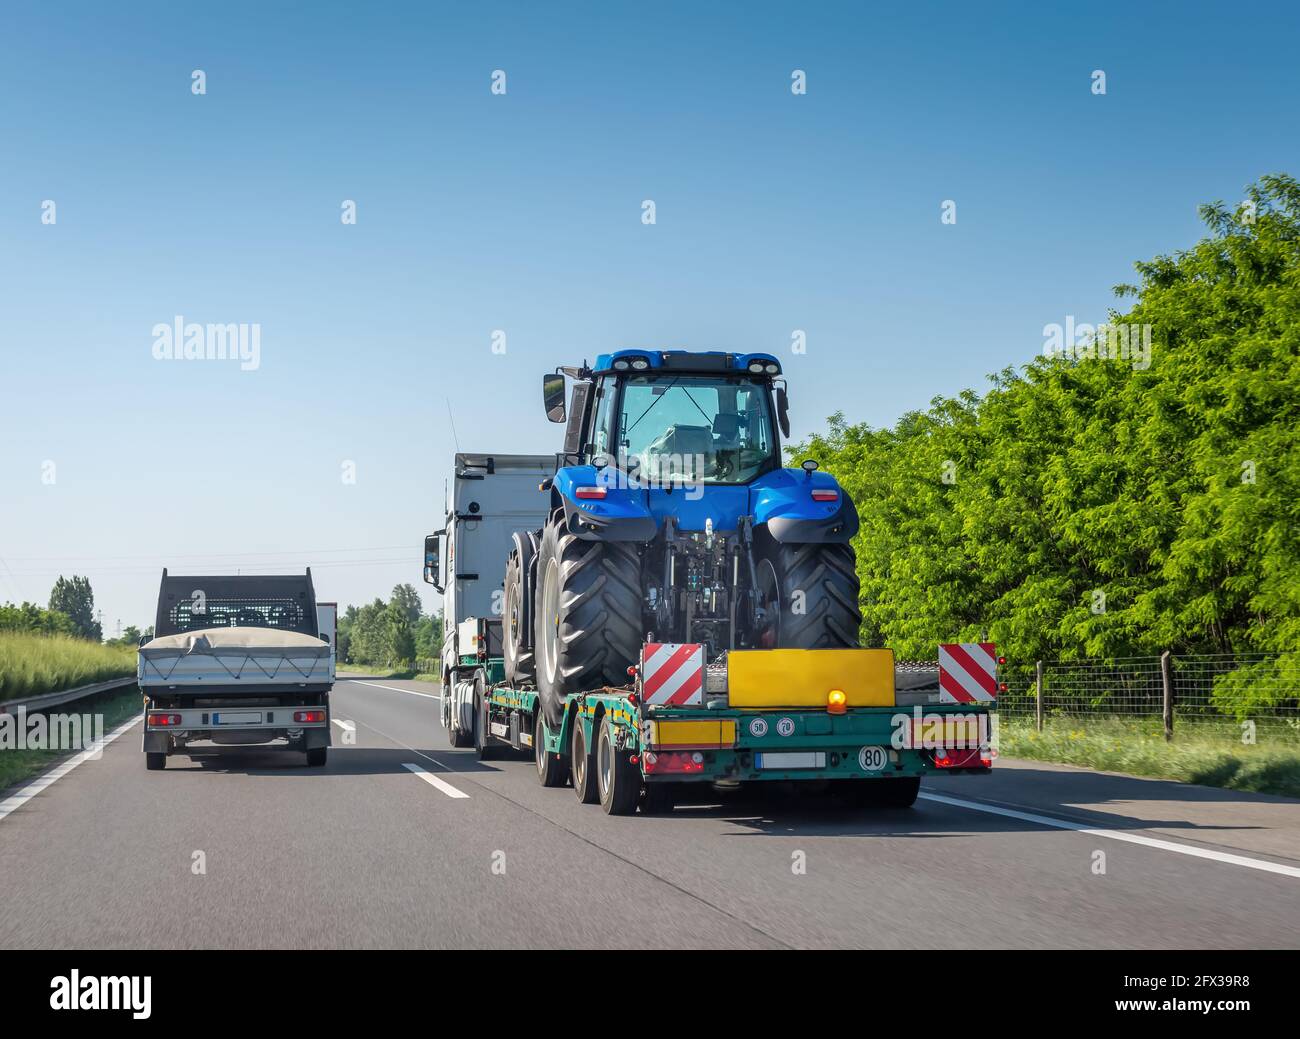 New blue tractor on long trailer platform of truck for transporting heavy machinery on highway. Transportation of agricultural machinery Stock Photo